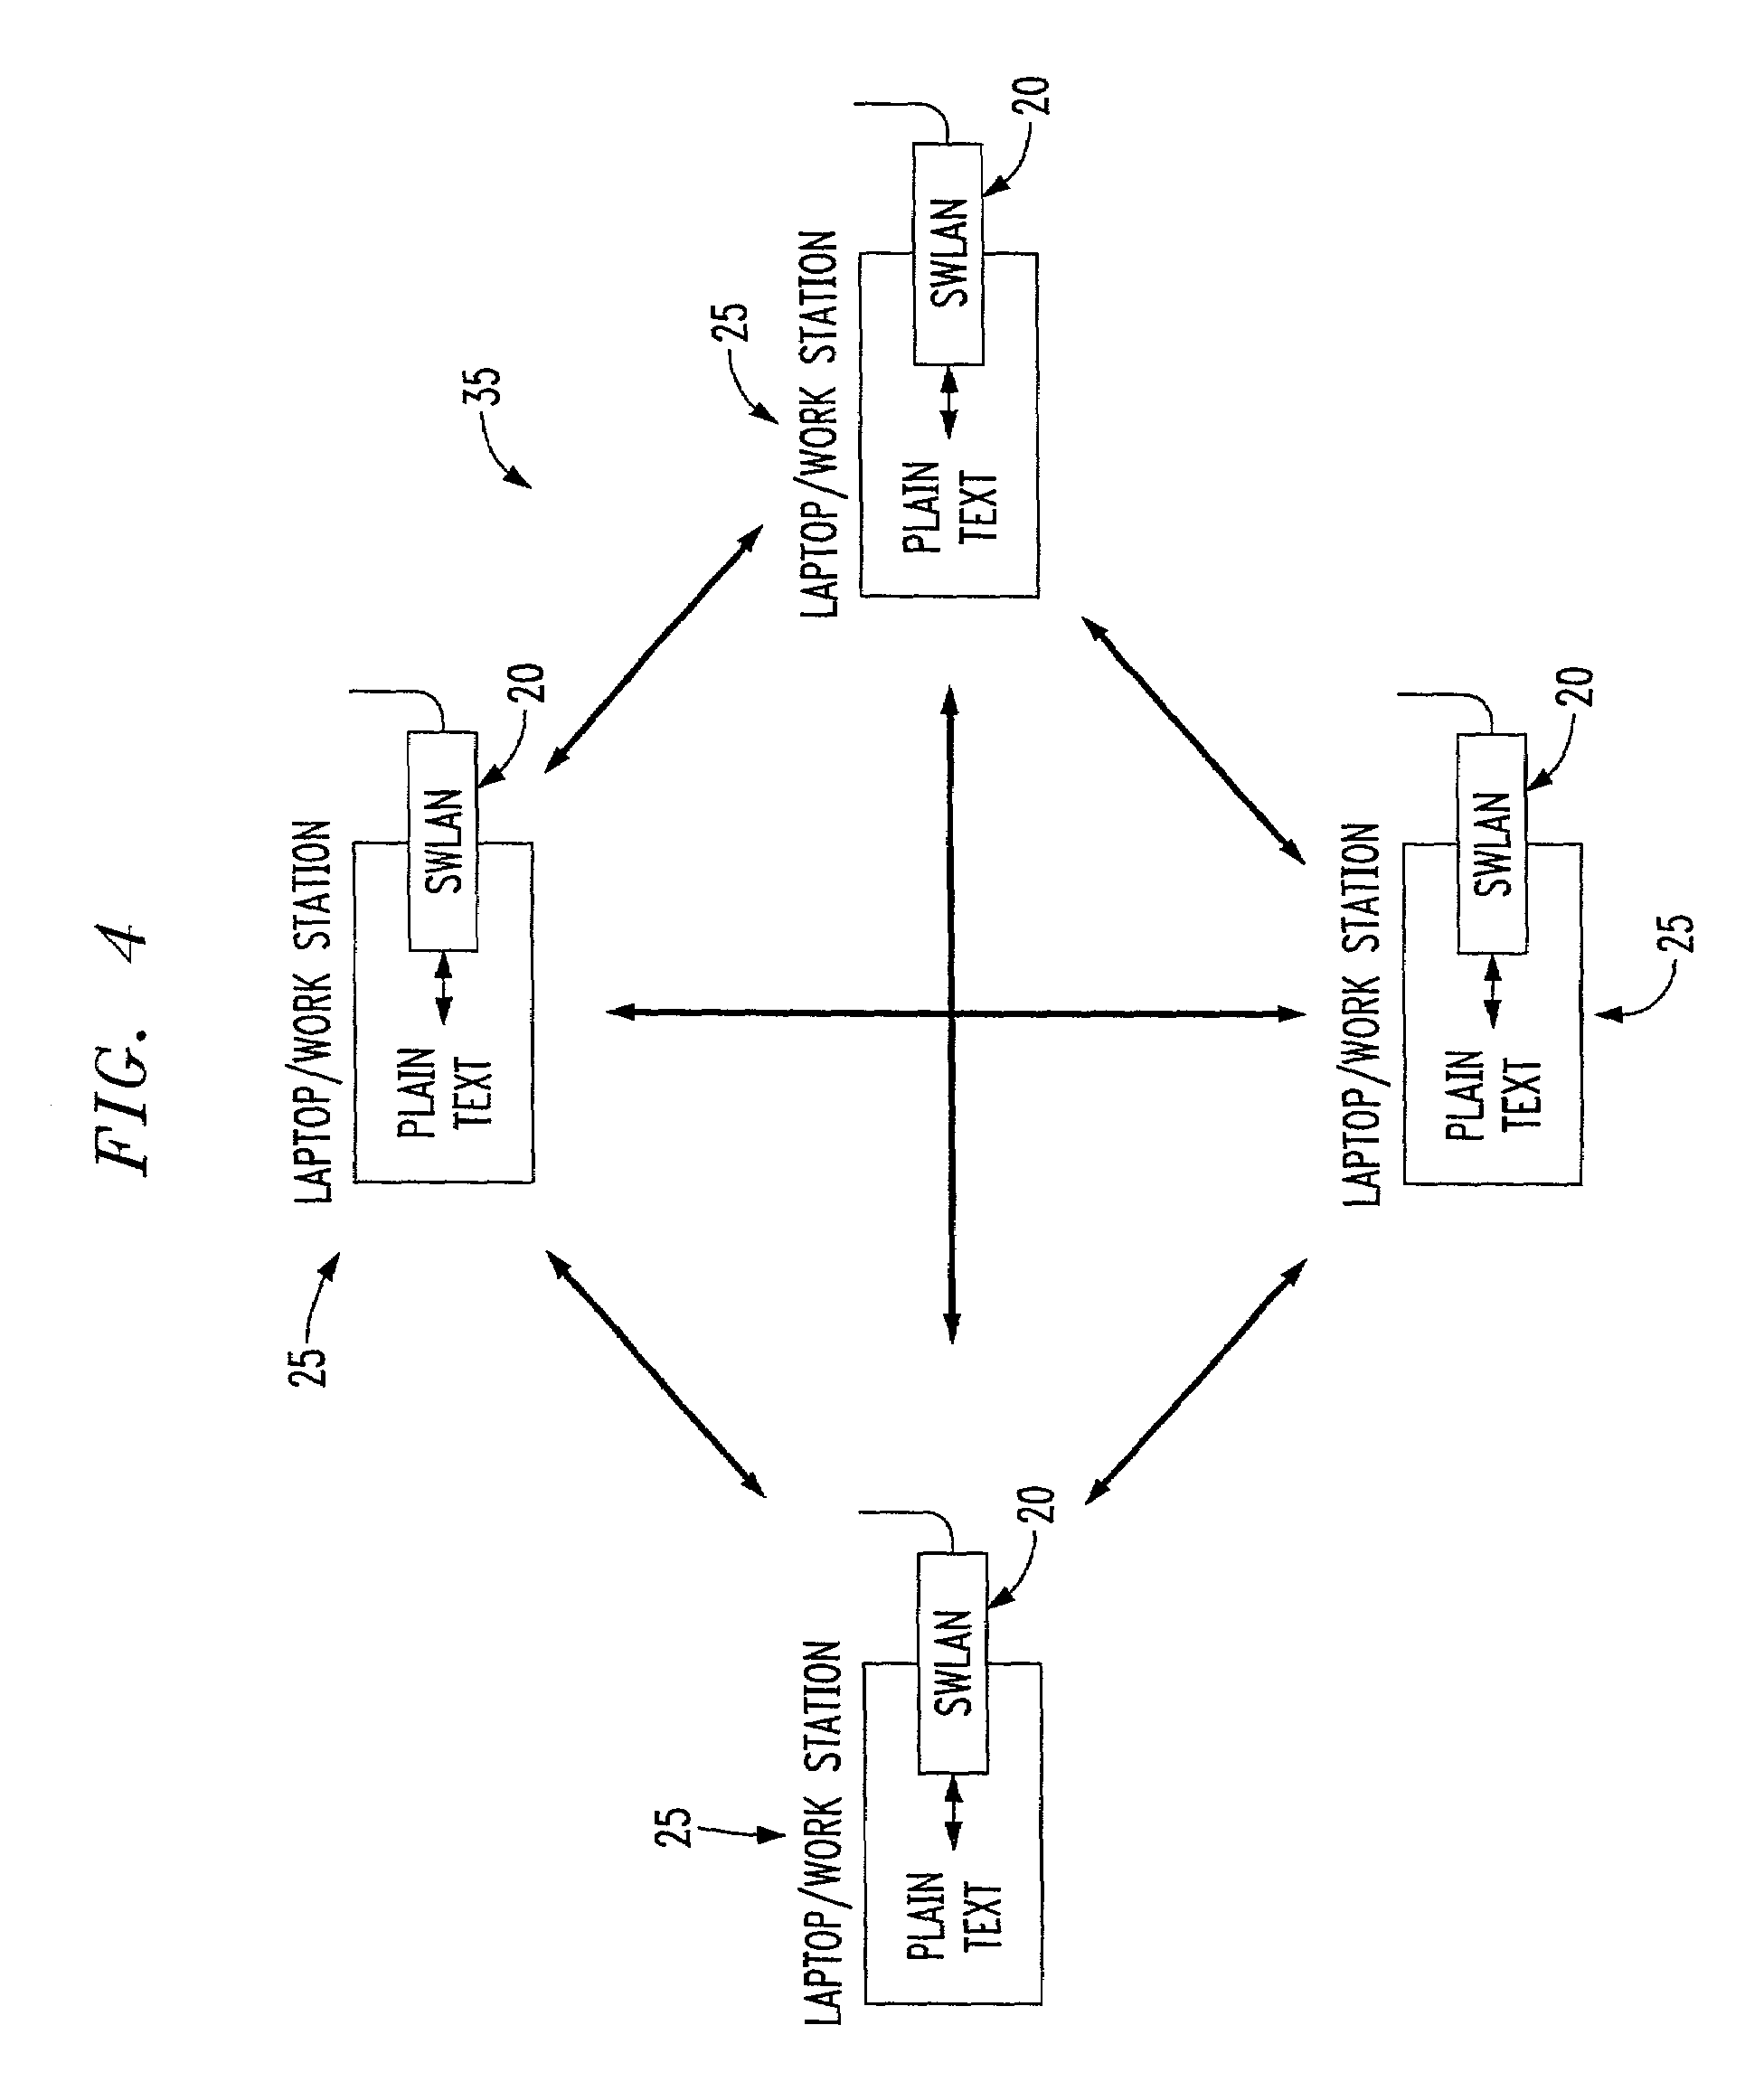 Secure wireless LAN device including tamper resistant feature and associated method